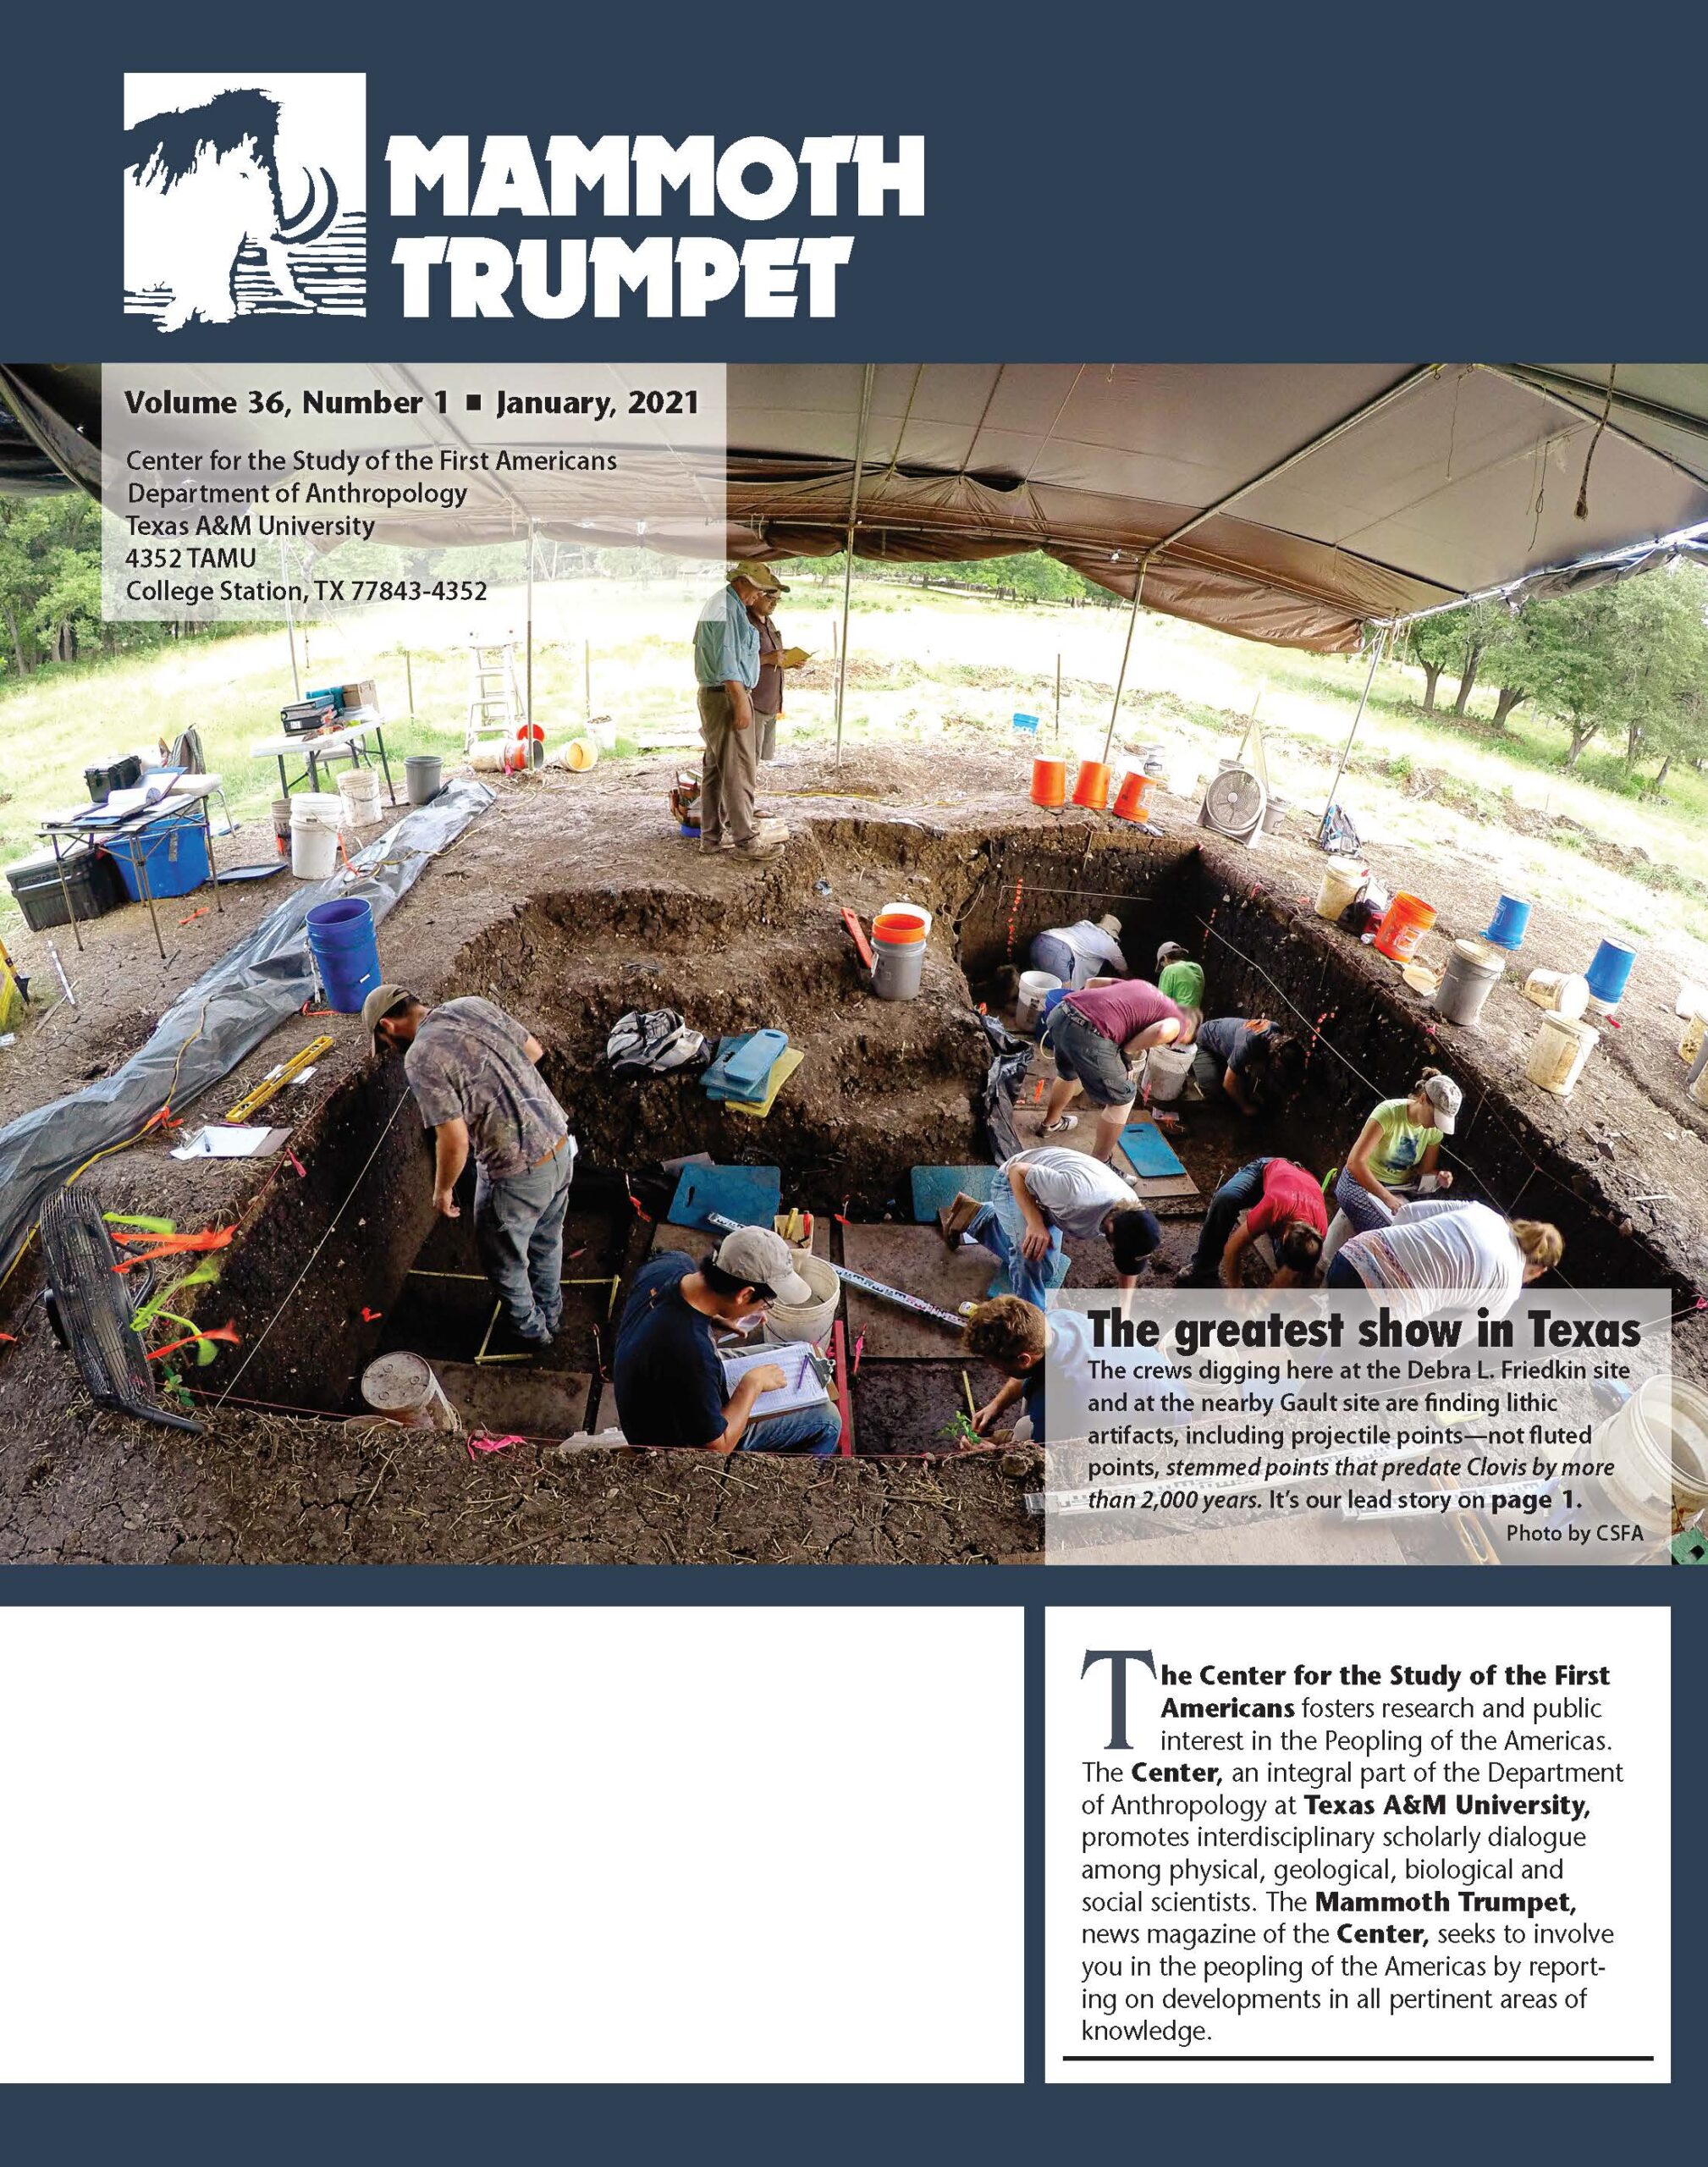 Cover of Mammoth Trumpet January 2021 issue